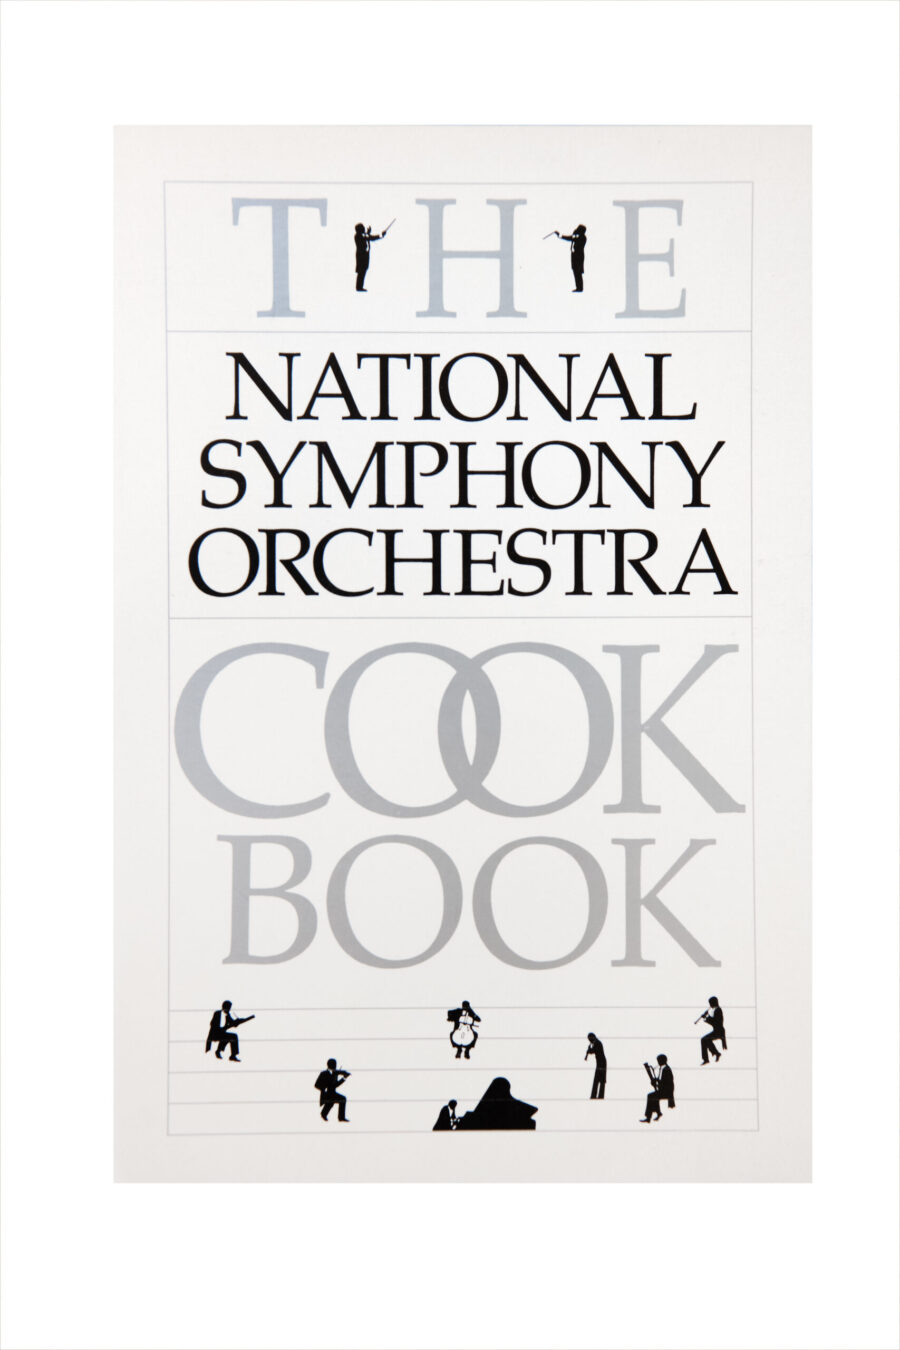 Cover of The National Symphony Orchestra Cookbook designed by Barry Huber